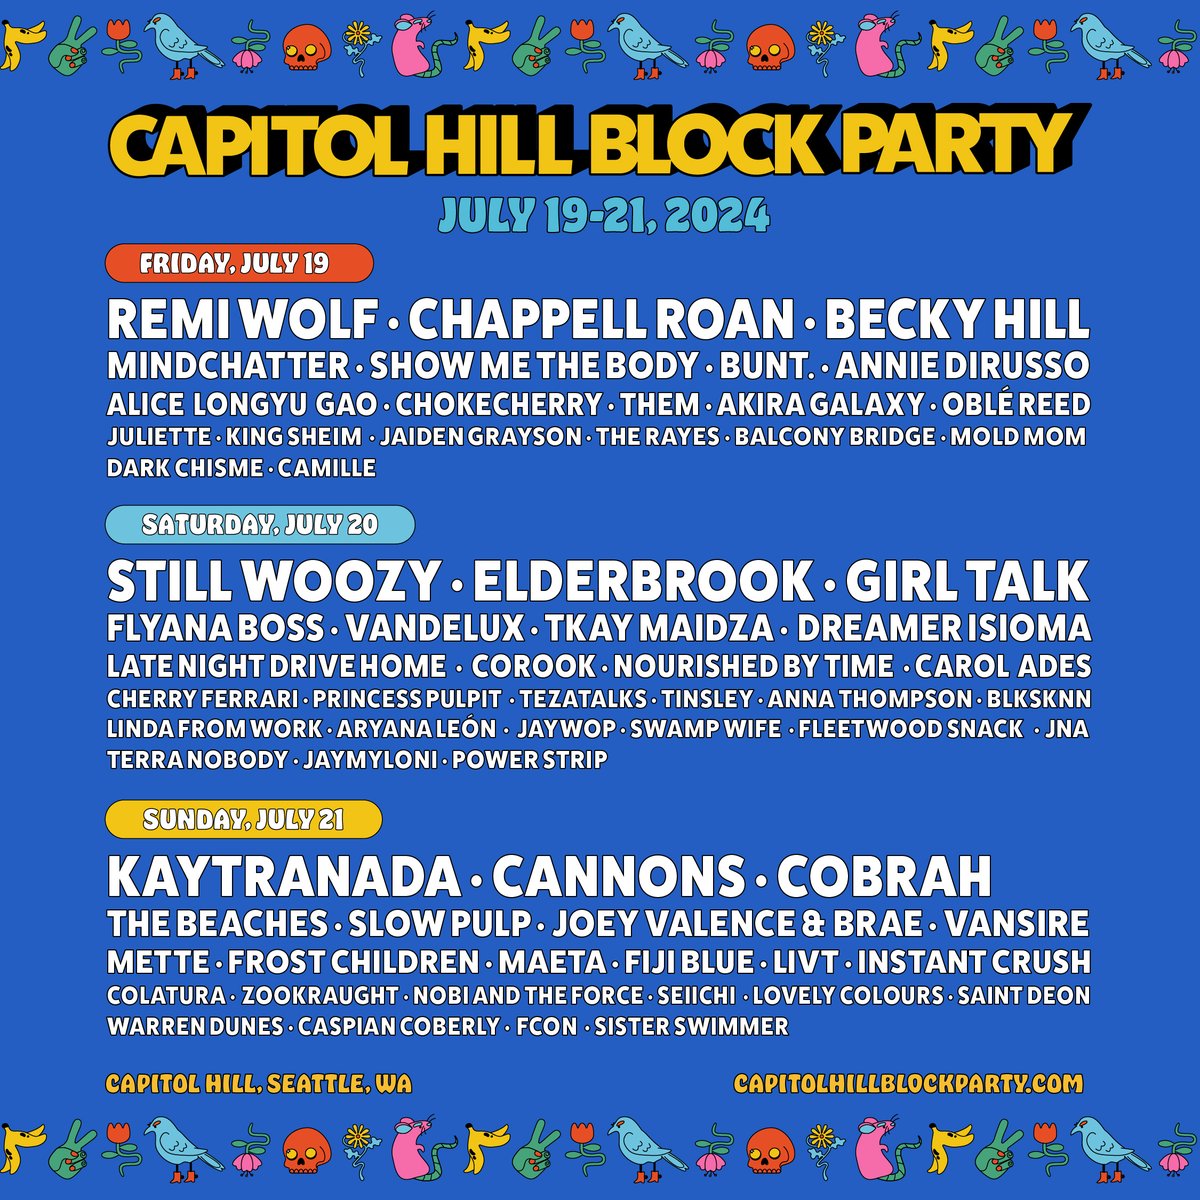 Save the date! The Capitol Hill Block Party is happening on 7/19-21. This year's lineup is stacked with talent, featuring Kaytranada, Elderbrook, and more. Get your tix for the ultimate summer weekend in the heart of Capitol Hill! Win weekend passes! t.dostuffmedia.com/t/c/s/125111